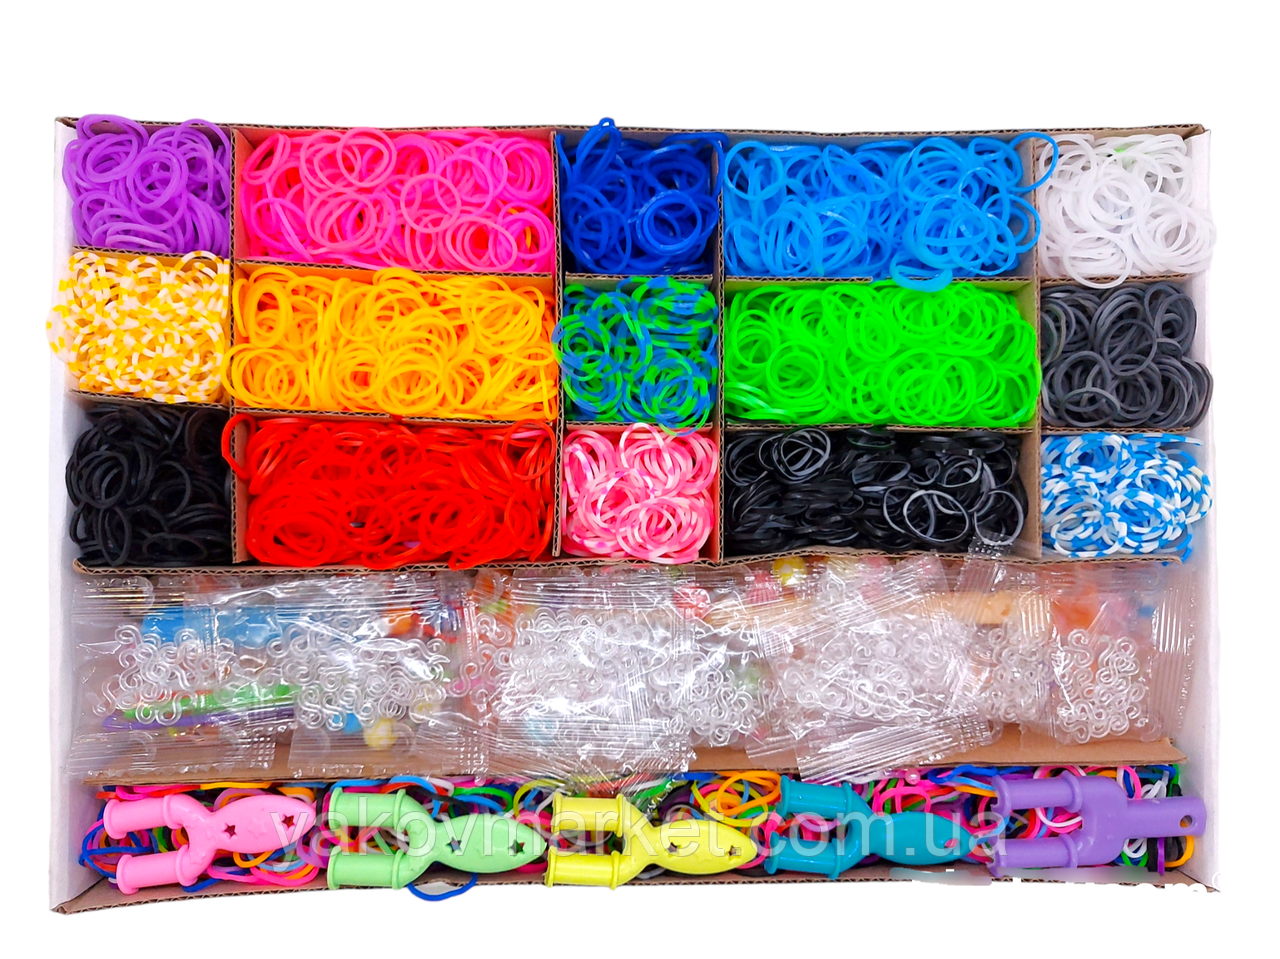 5 Ways to Make Loom Bands - wikiHow